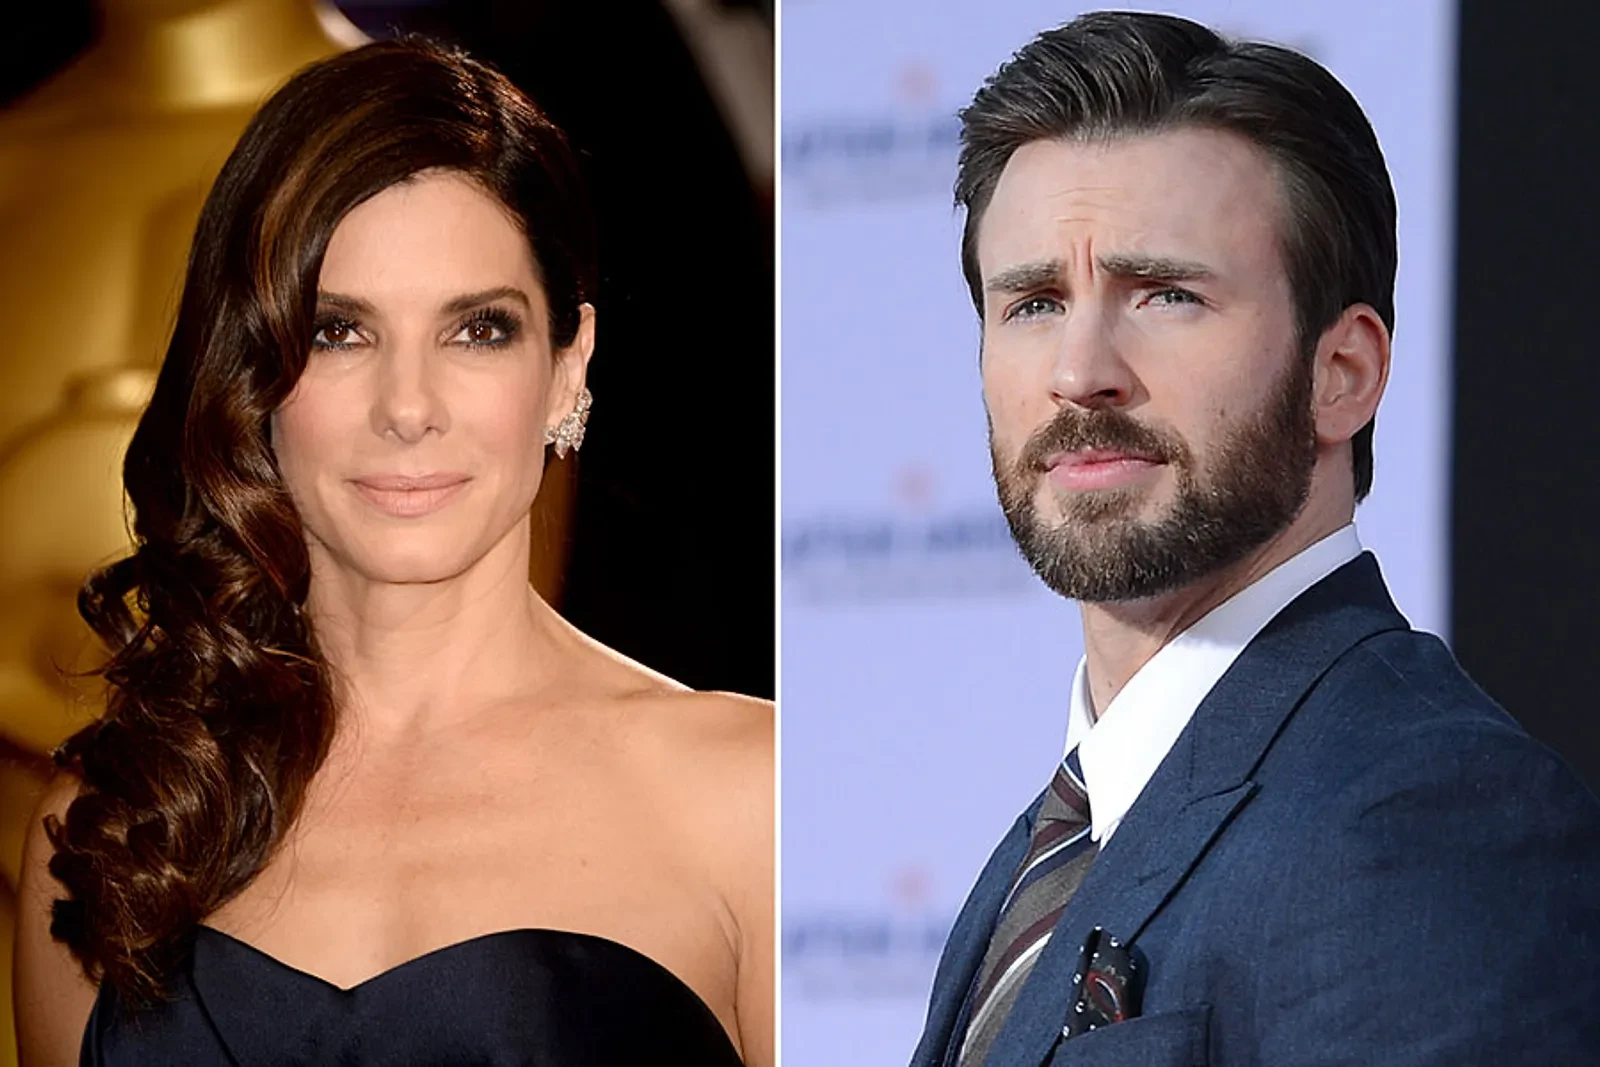 Chris Evans was reportedly dating Sandra Bullock back in 2014